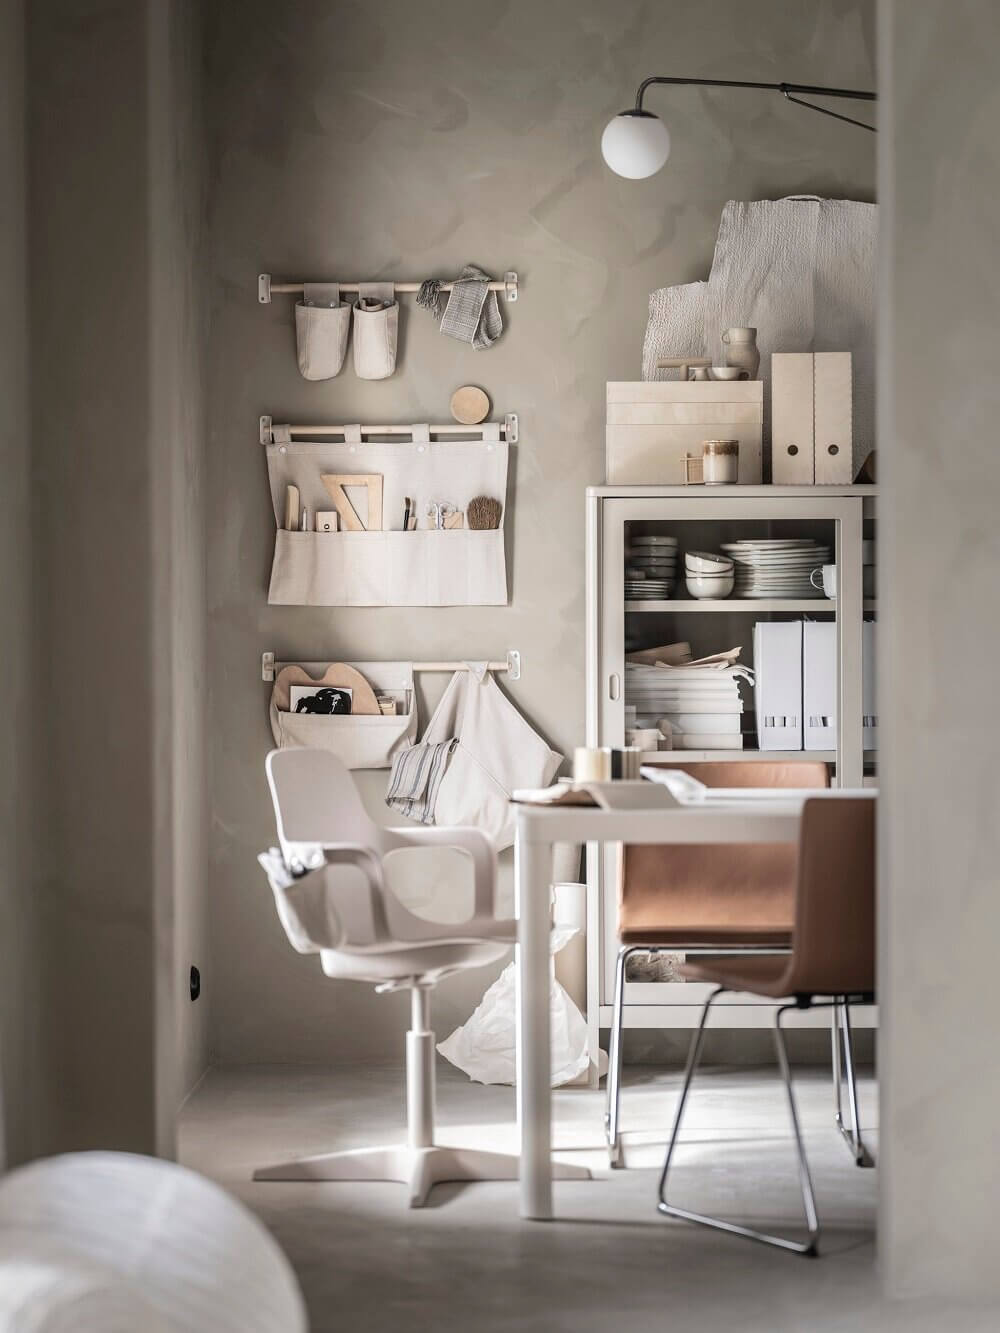 home organizing ideas ikea nordroom25 Clever and Stylish Home Organizing Ideas From IKEA